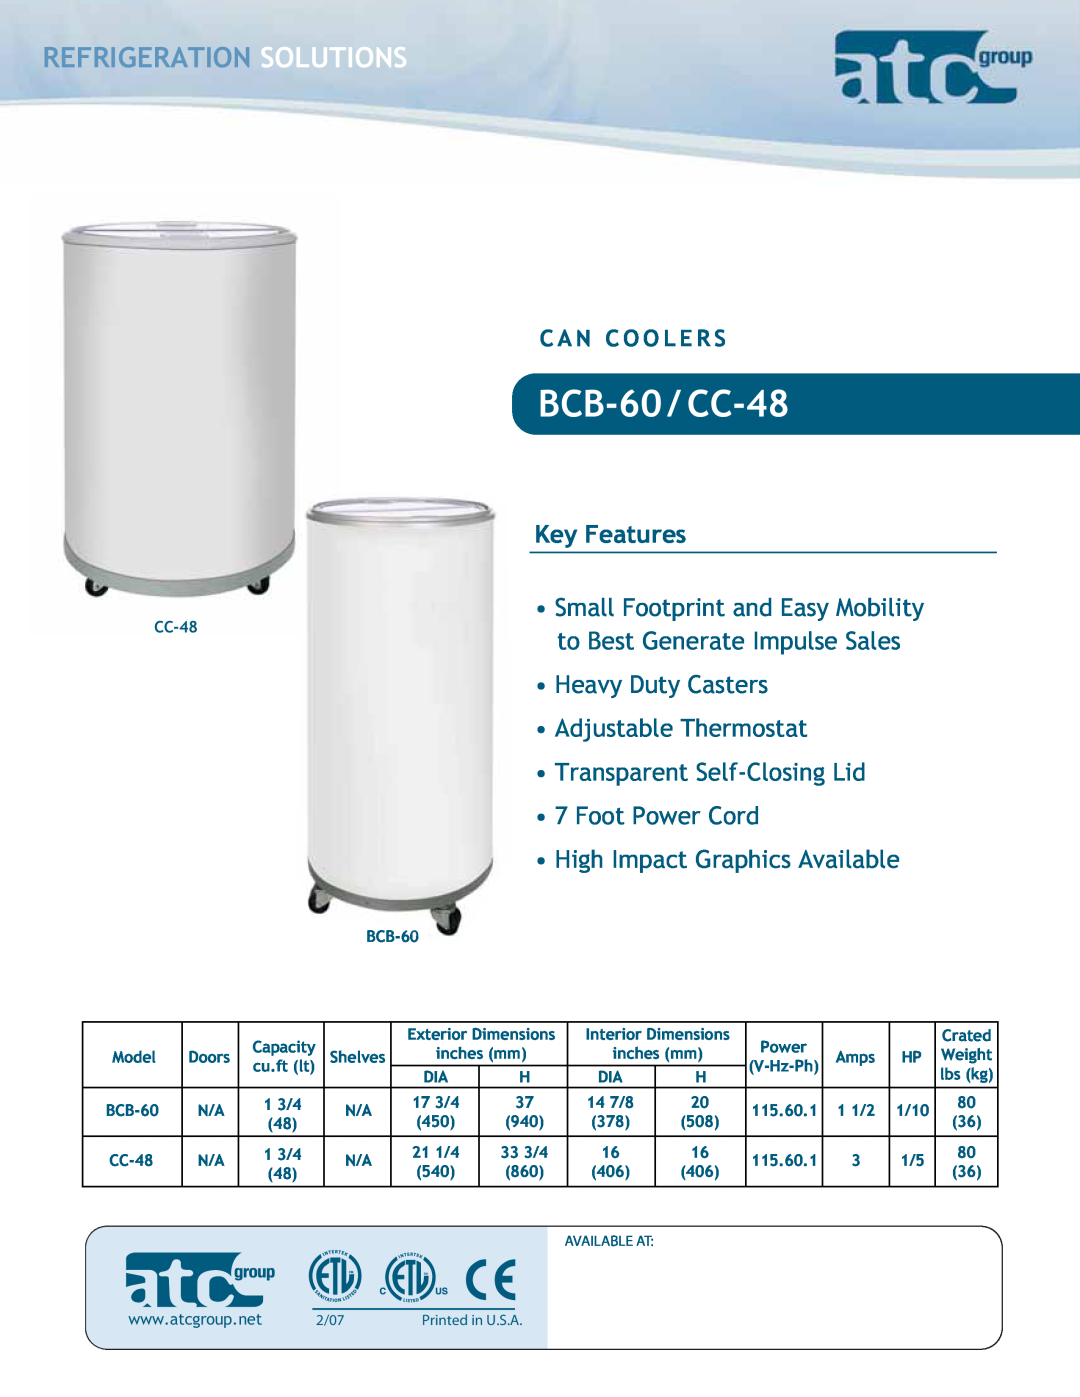 ATC Group dimensions Refrigeration Solutions, BCB-60 / CC-48, Key Features, Heavy Duty Casters Adjustable Thermostat 